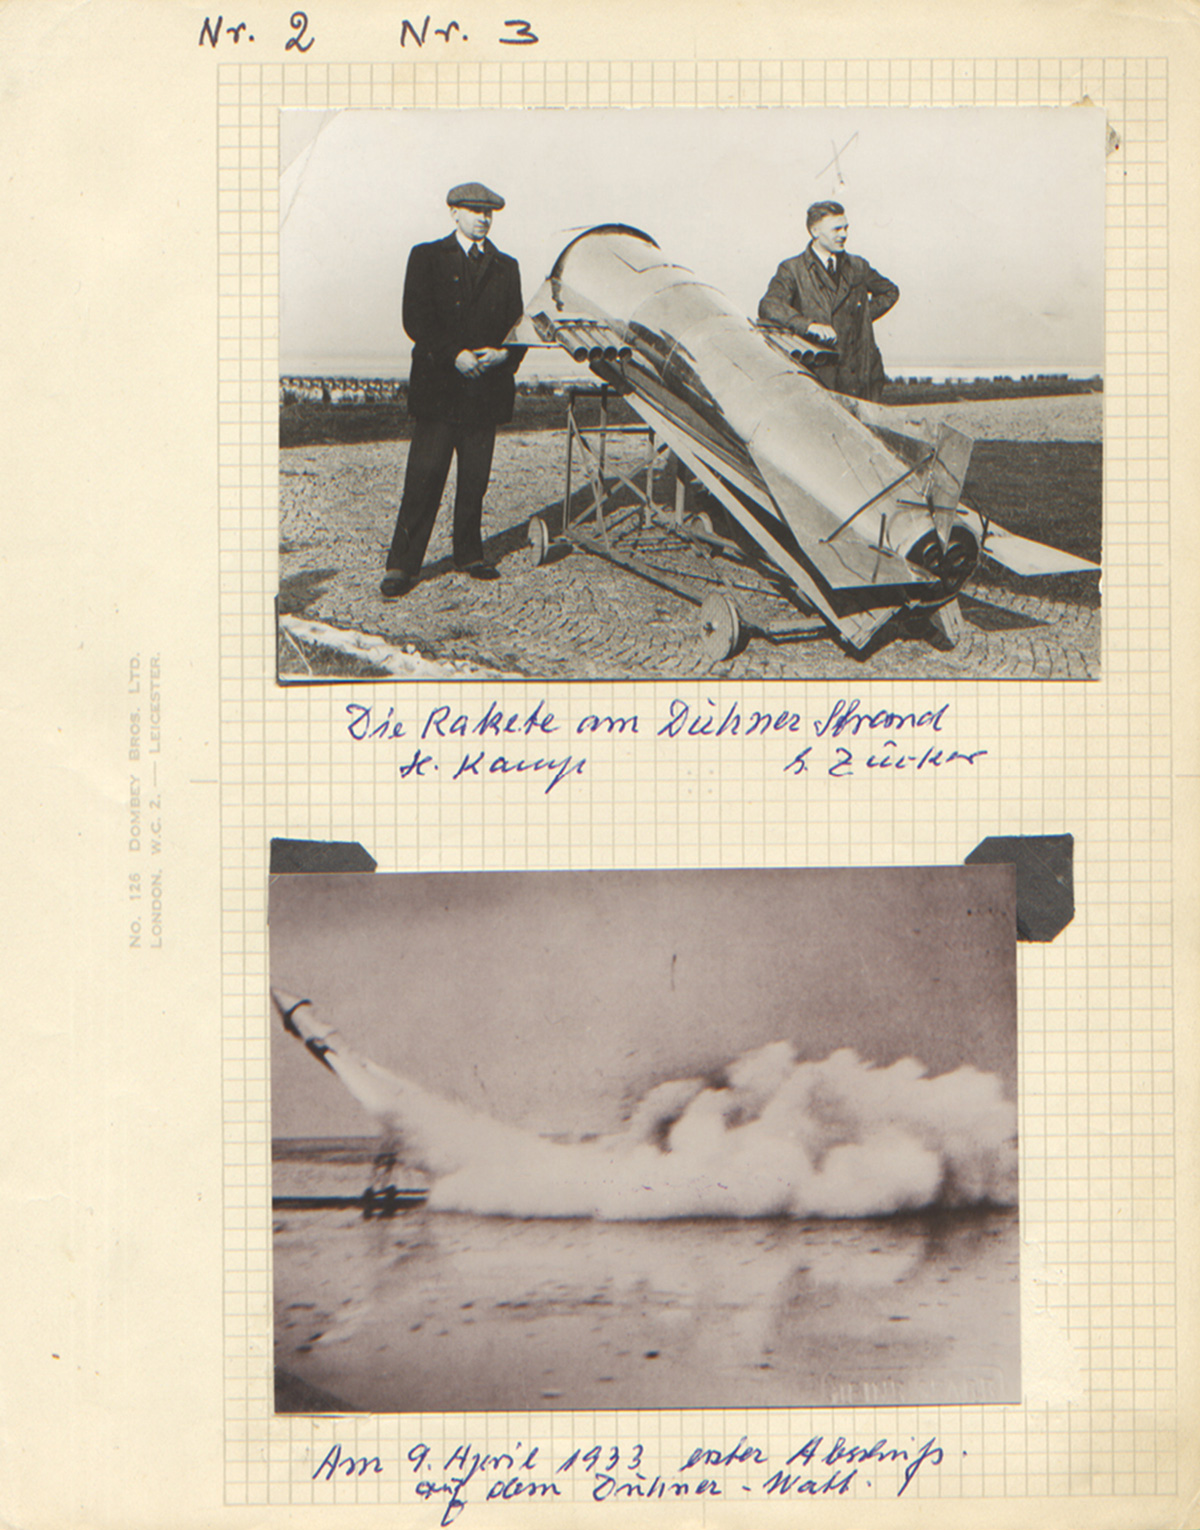 A page from the scrapbook with two images, one showing Zucker leaning against the rocket used in the launch at Duhnen, Germany, in 1933, and a photo of the launch itself.
